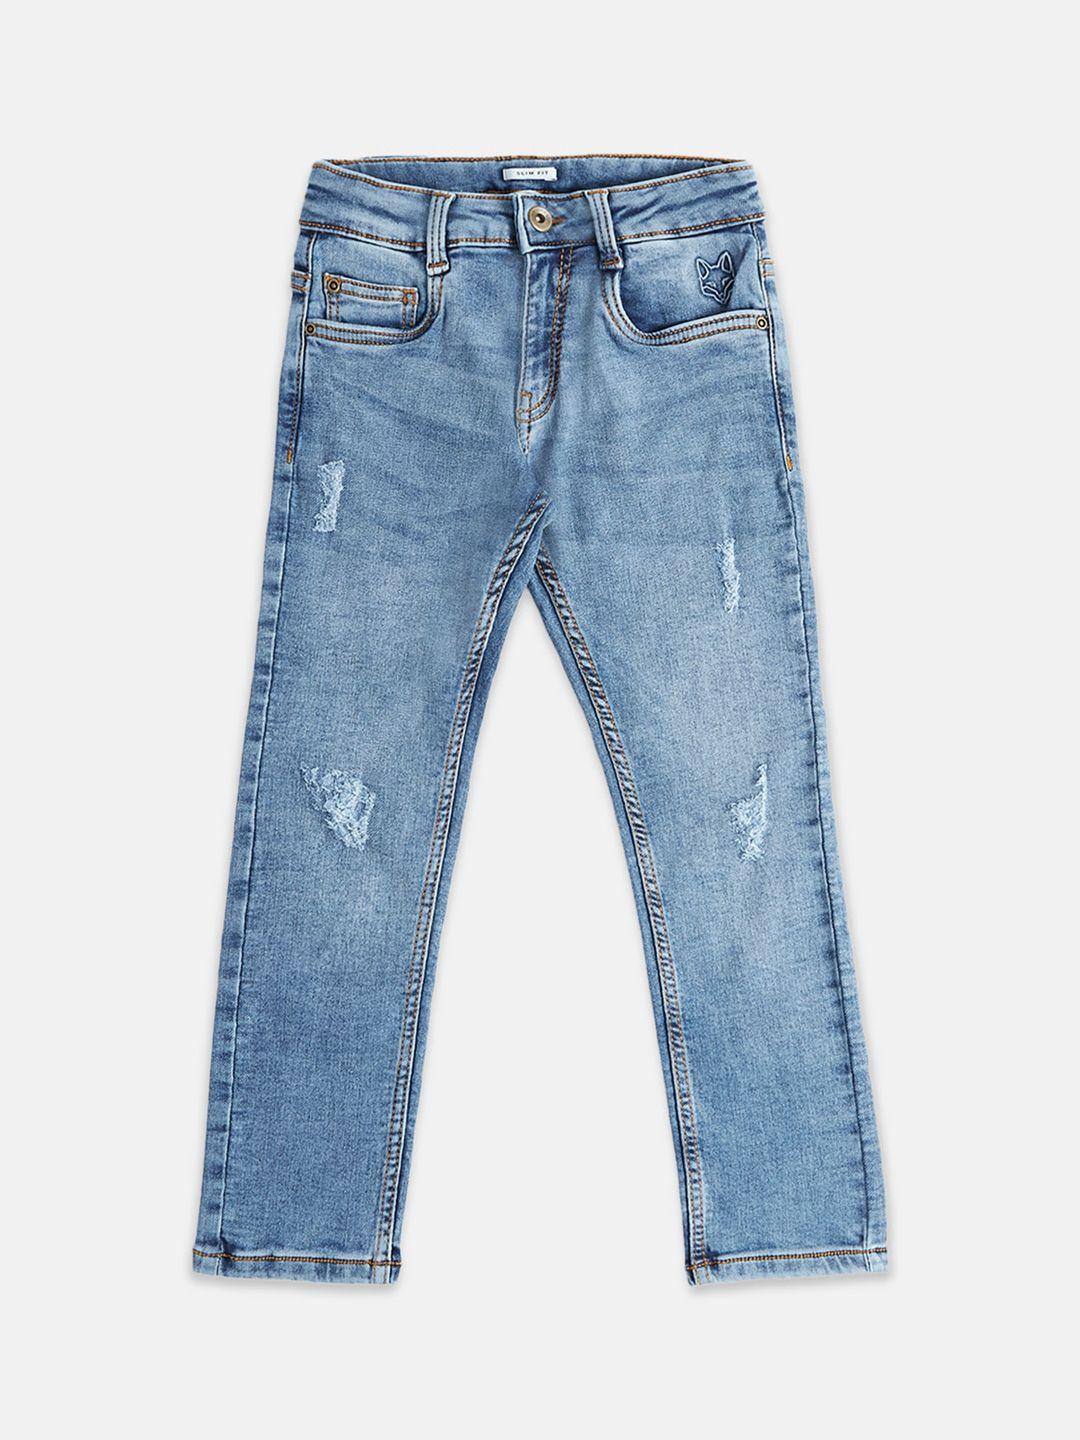 pantaloons-junior-boys-tapered-fit-mildly-distressed-light-fade-jeans